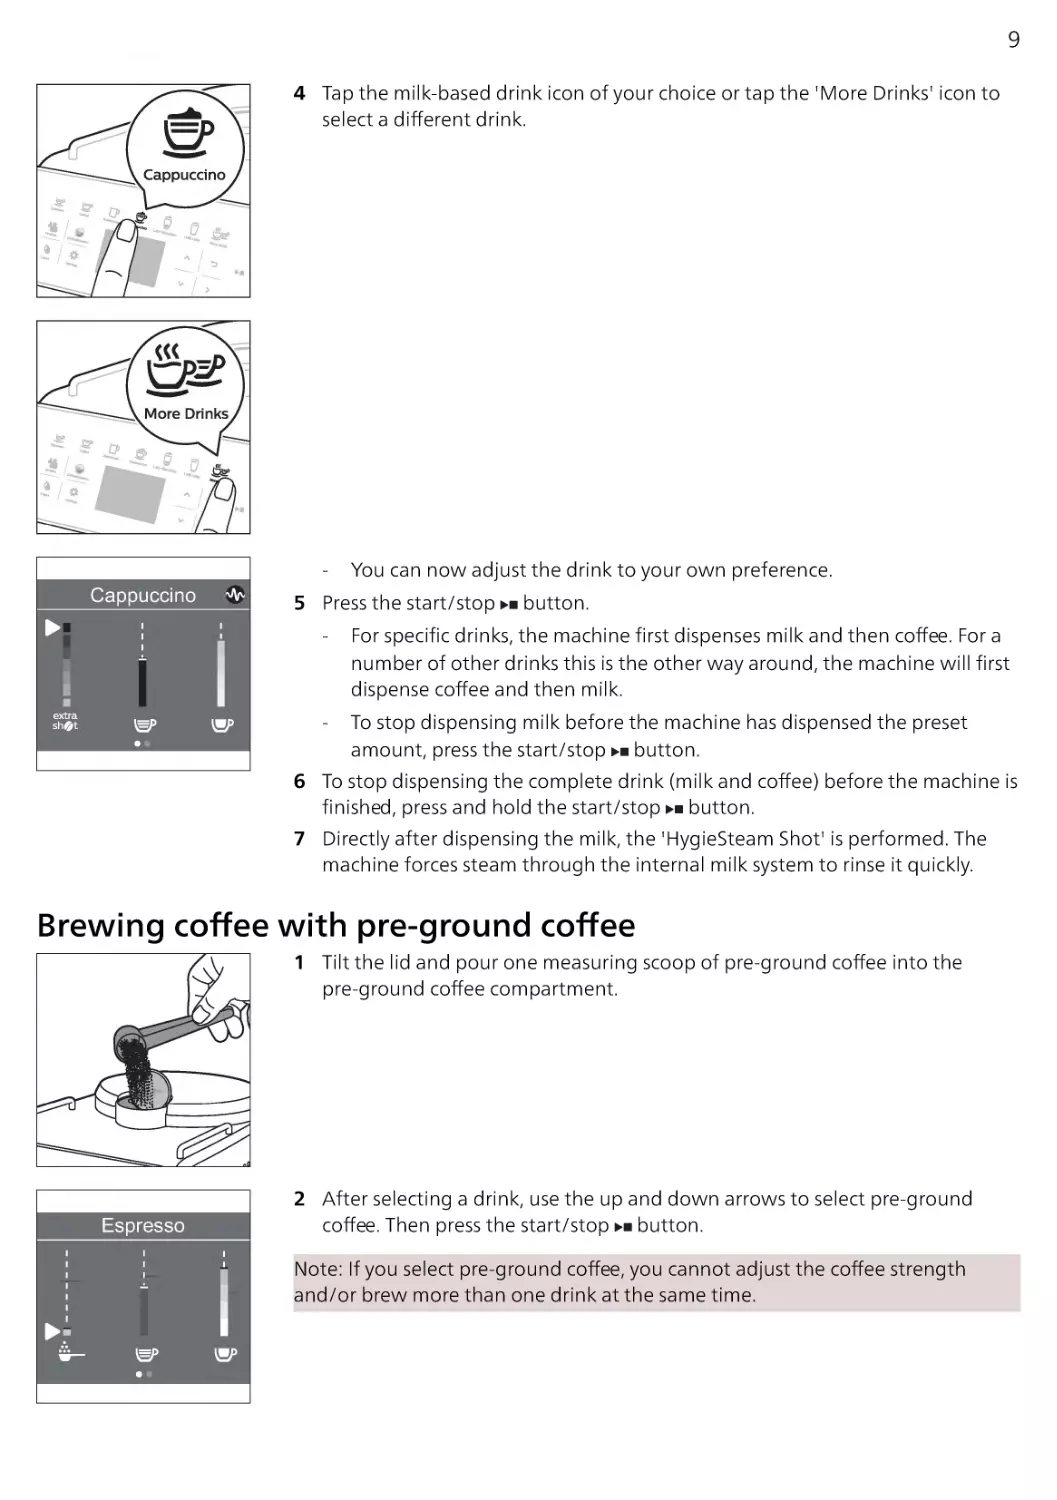 Brewing coffee with pre-ground coffee